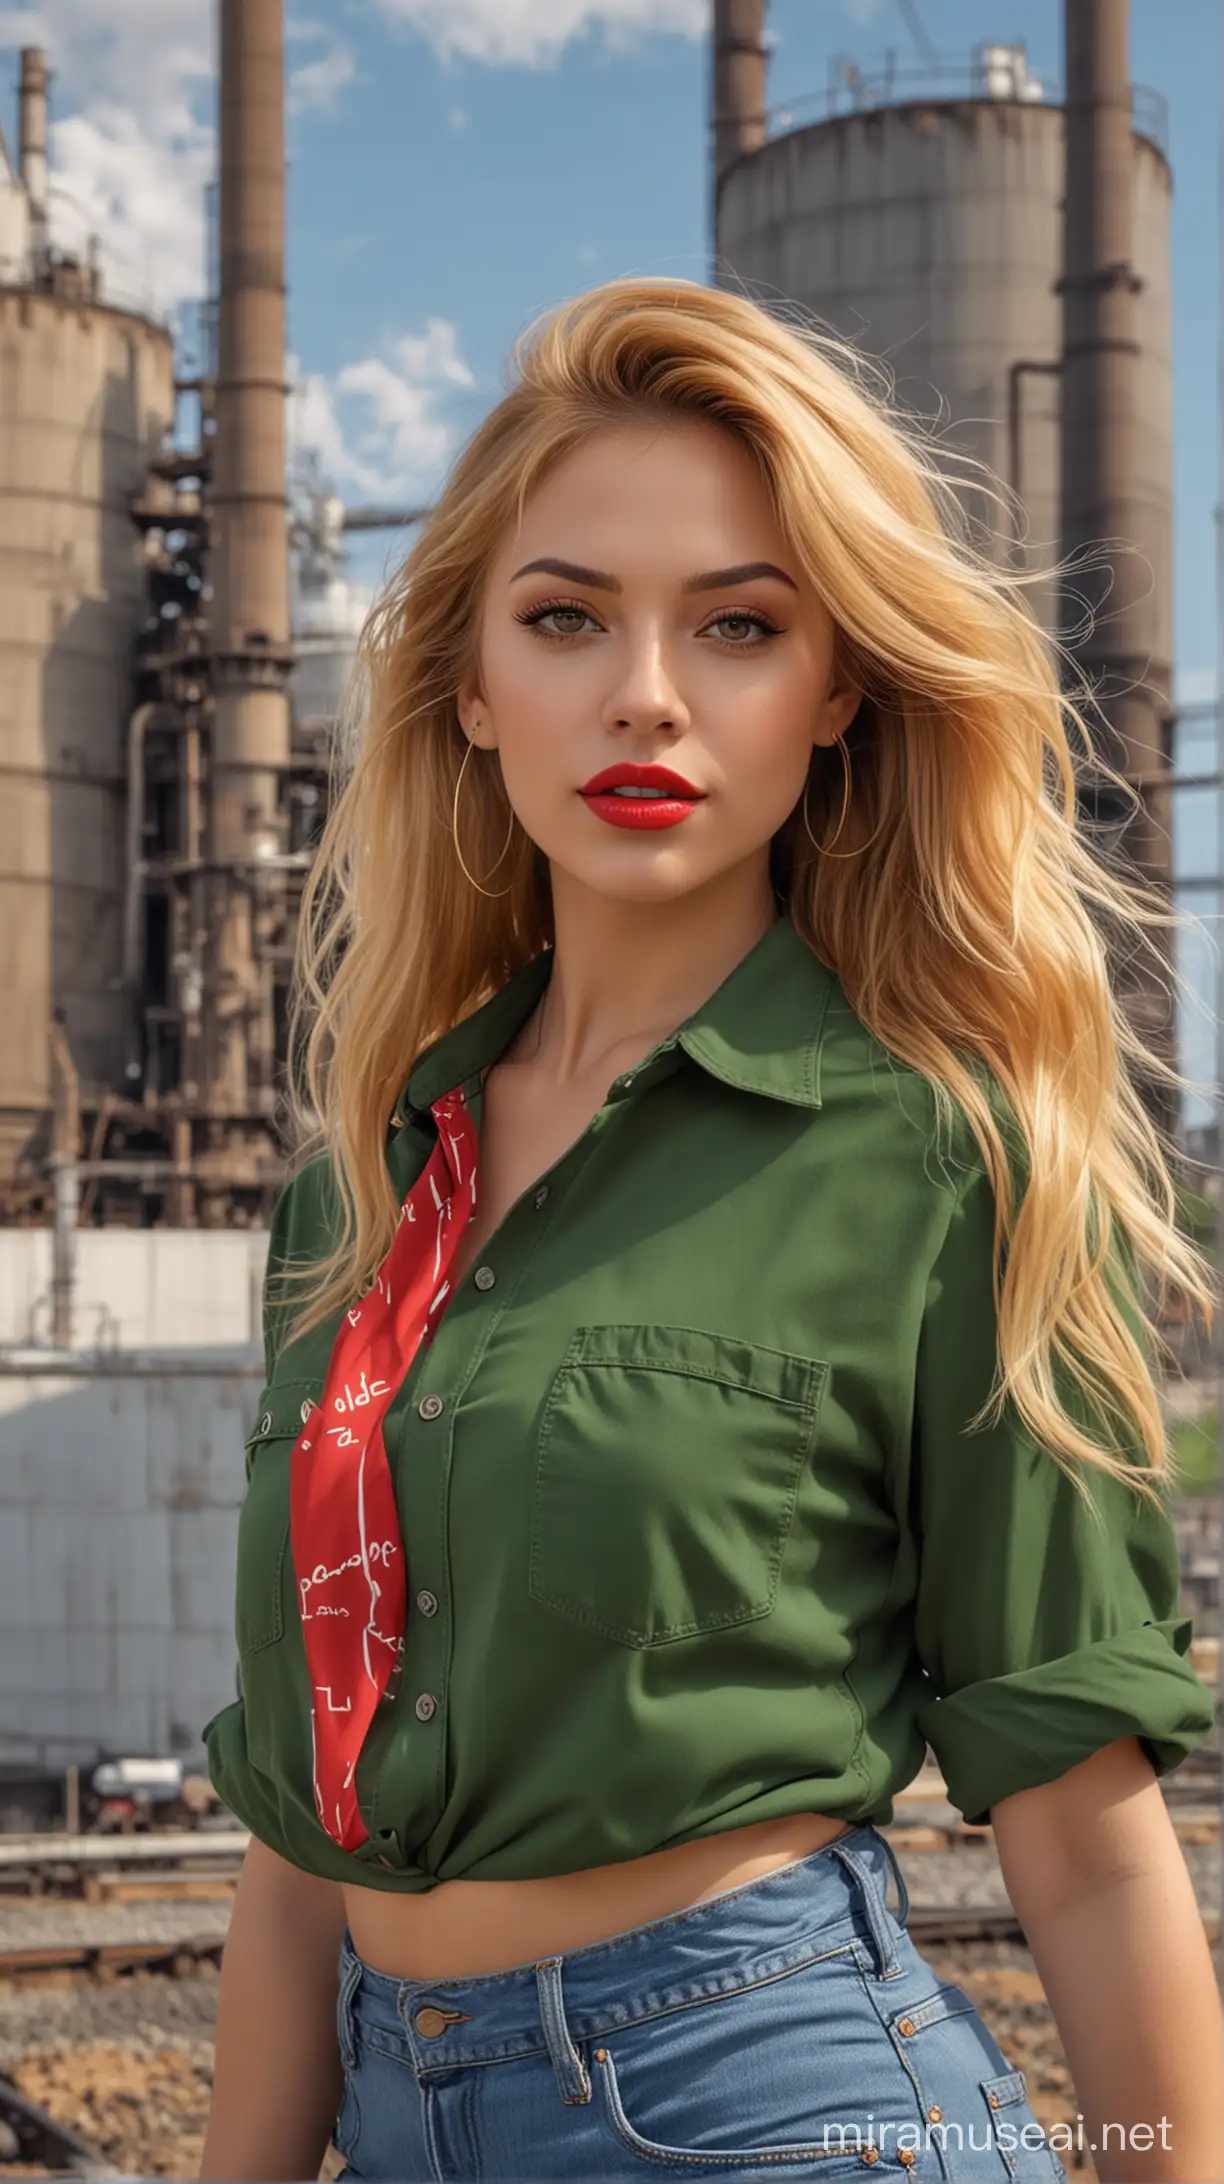 4k Ai art  beautiful USA hot girl golden hair red lipstick ear tops brown jeans and green line shirt in usa power plant